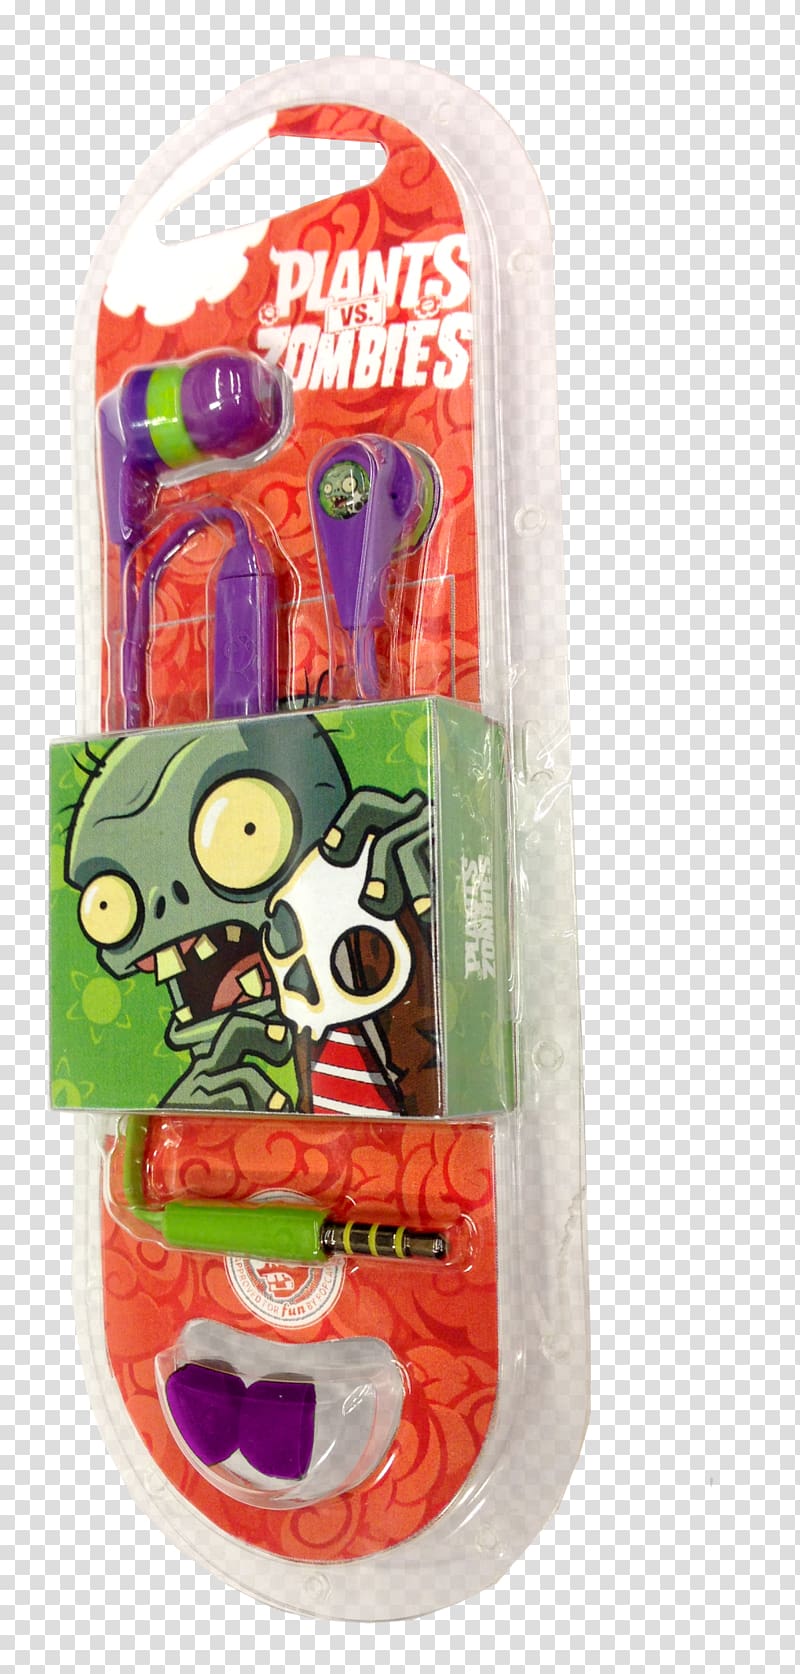 Plants vs. Zombies 2: It's About Time Barnes & Noble Nook Plants Vs Zombies 2 Game, Online, Cheats PC Guide Unofficial Toy Plastic, toy transparent background PNG clipart